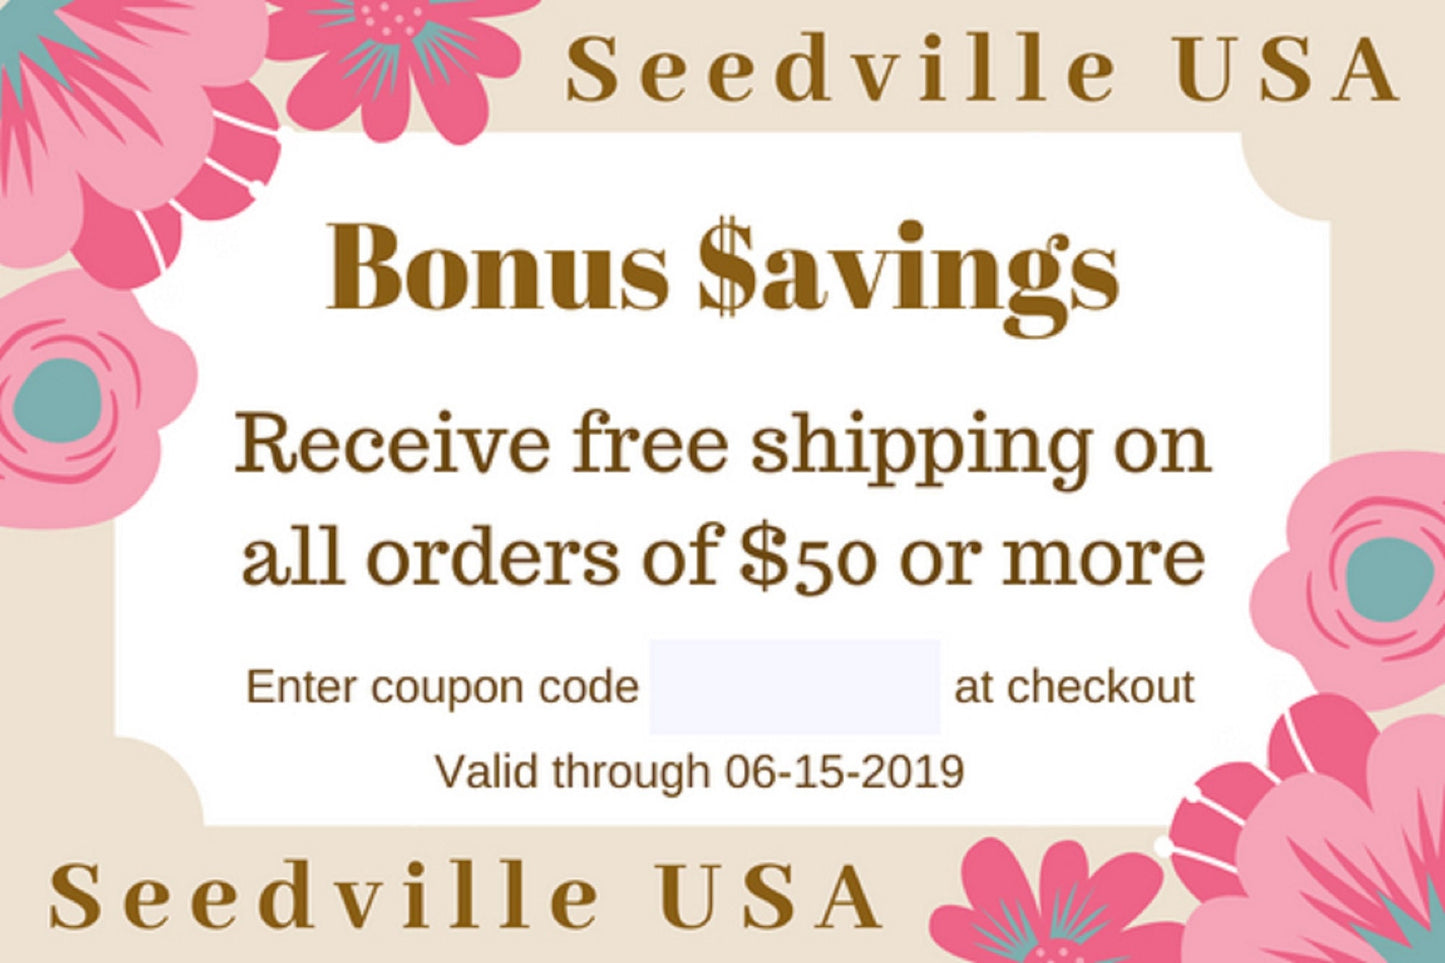 Seedville USA Shop Gift Certificate - Pink Flower Design - By Email or Postal Mail - You Choose Amount